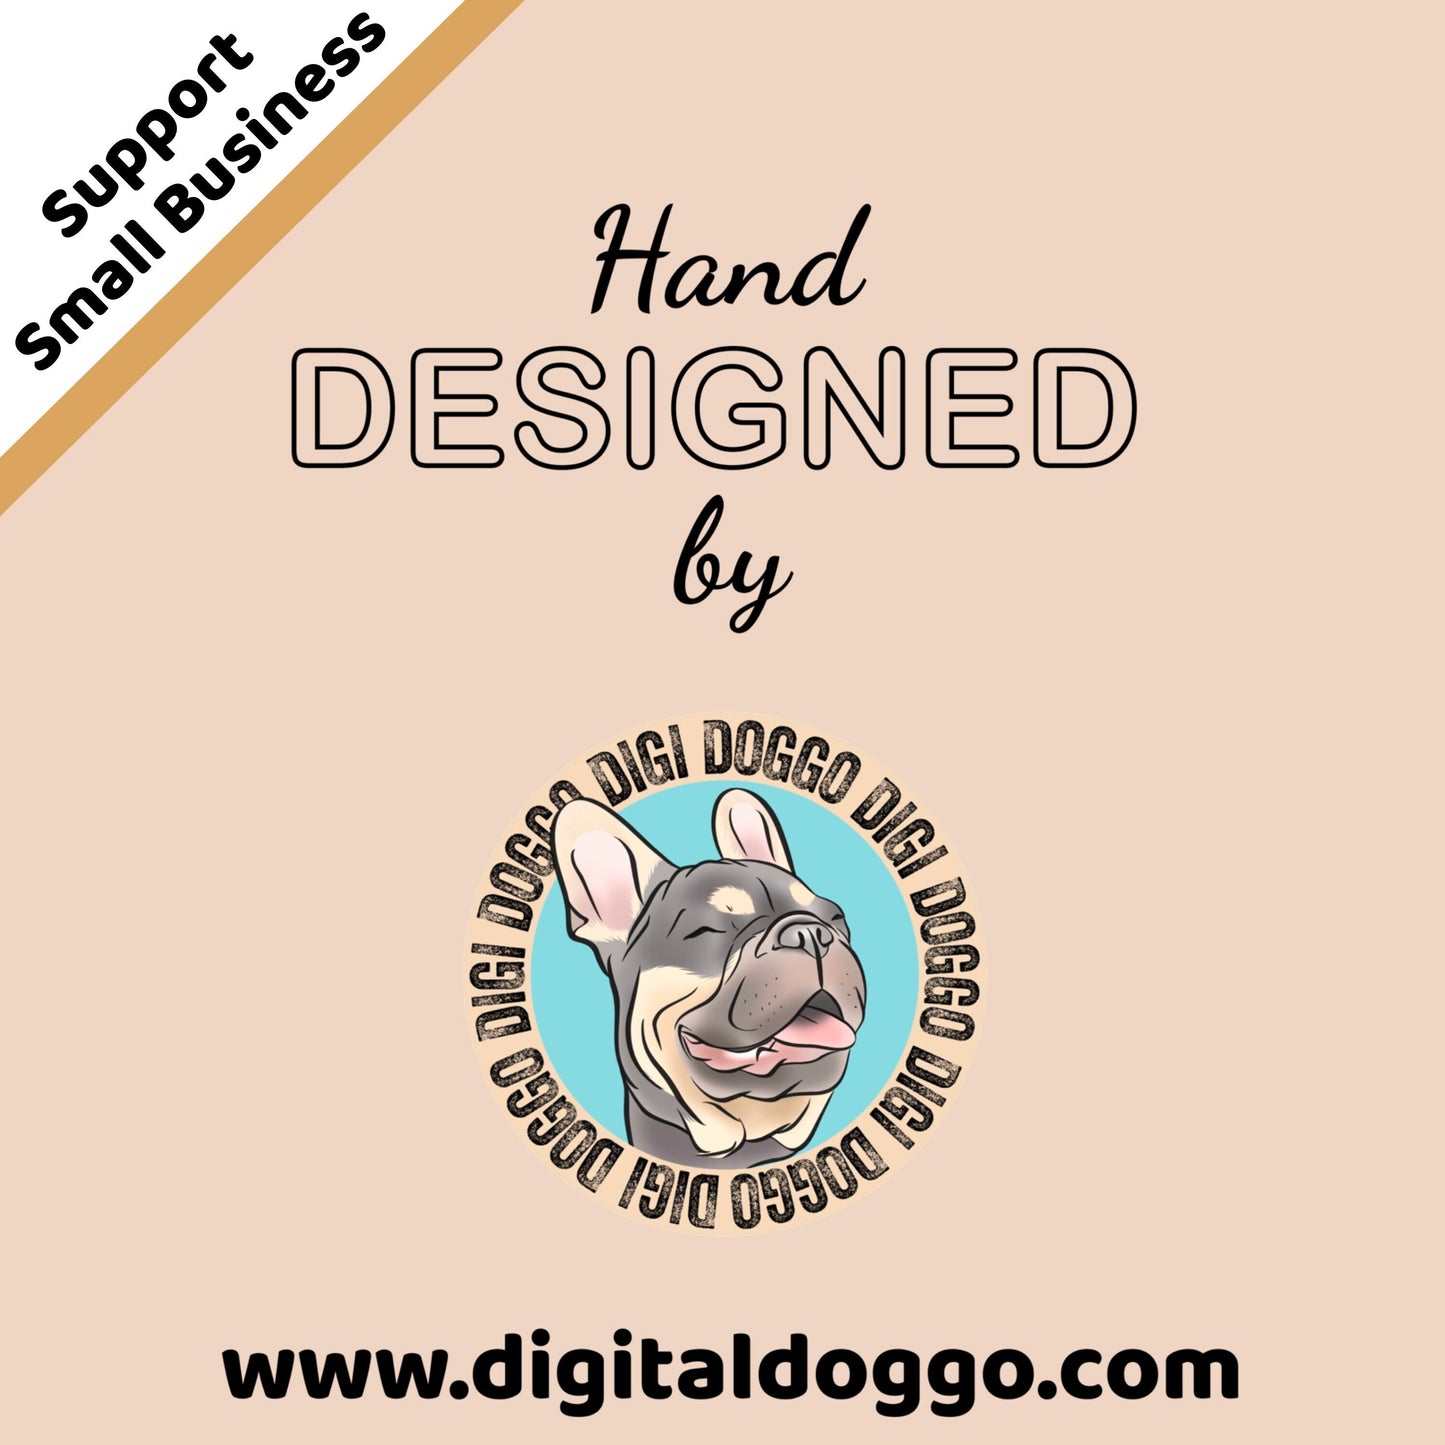 Afghan Hound ID Tag/ Personalised Dog Breed Face Metal Tag/ Russian Wolfhound Portrait Tag/ Custom Pet Identity Tag/ Afghan Hound Owner Gift